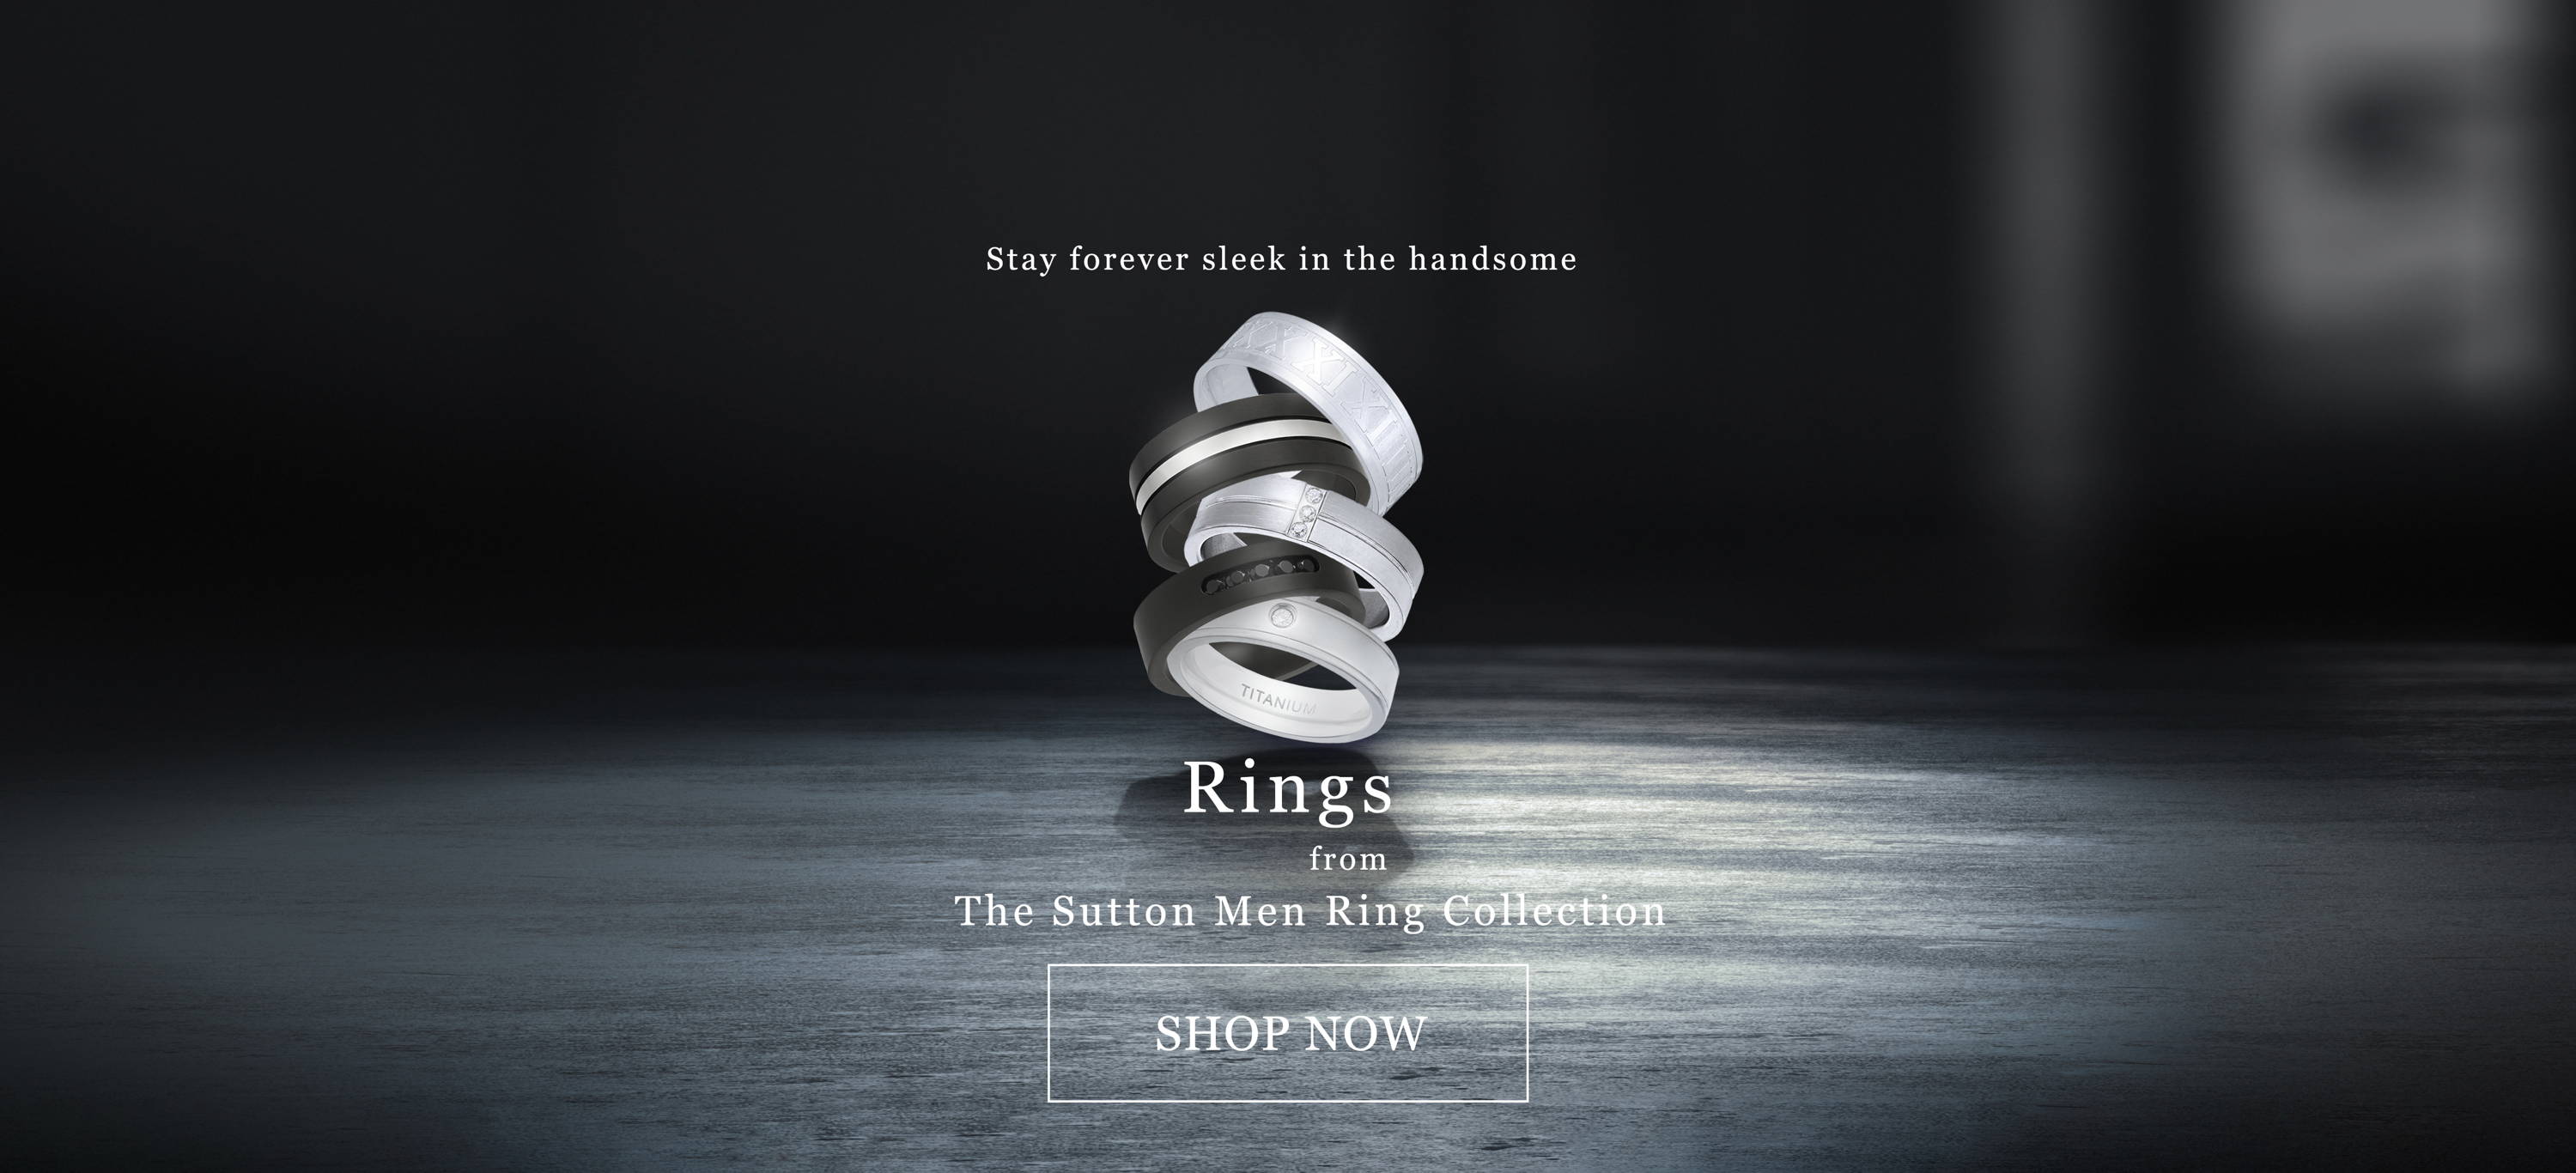 The Sutton Men Ring Collection